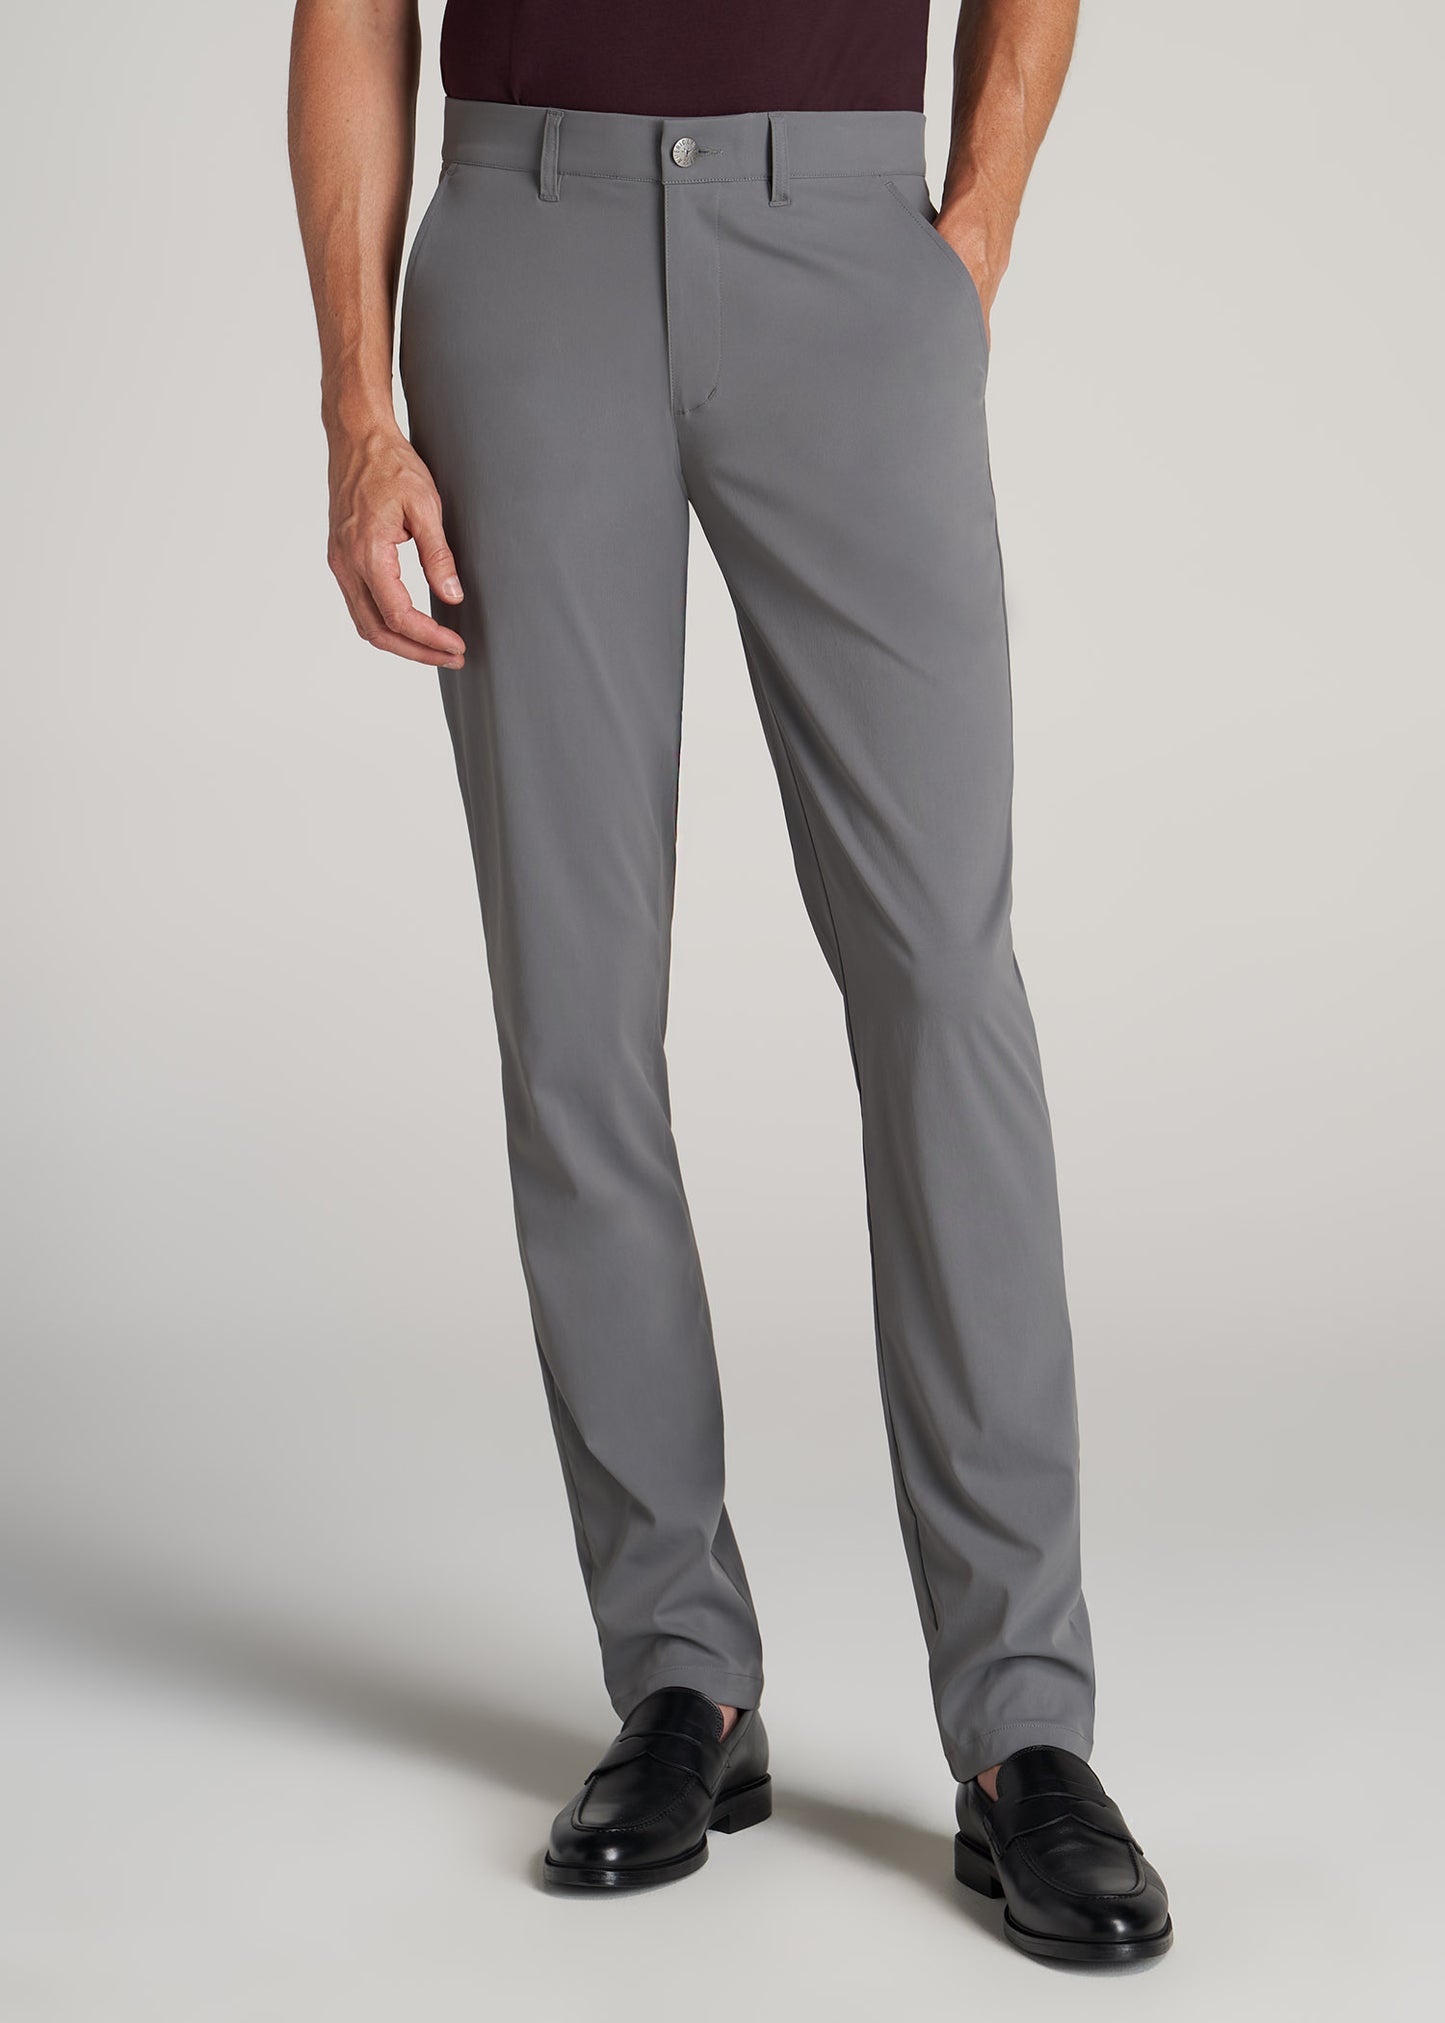       American-Tall-Men-Traveler-Chino-Pants-Charcoal-front